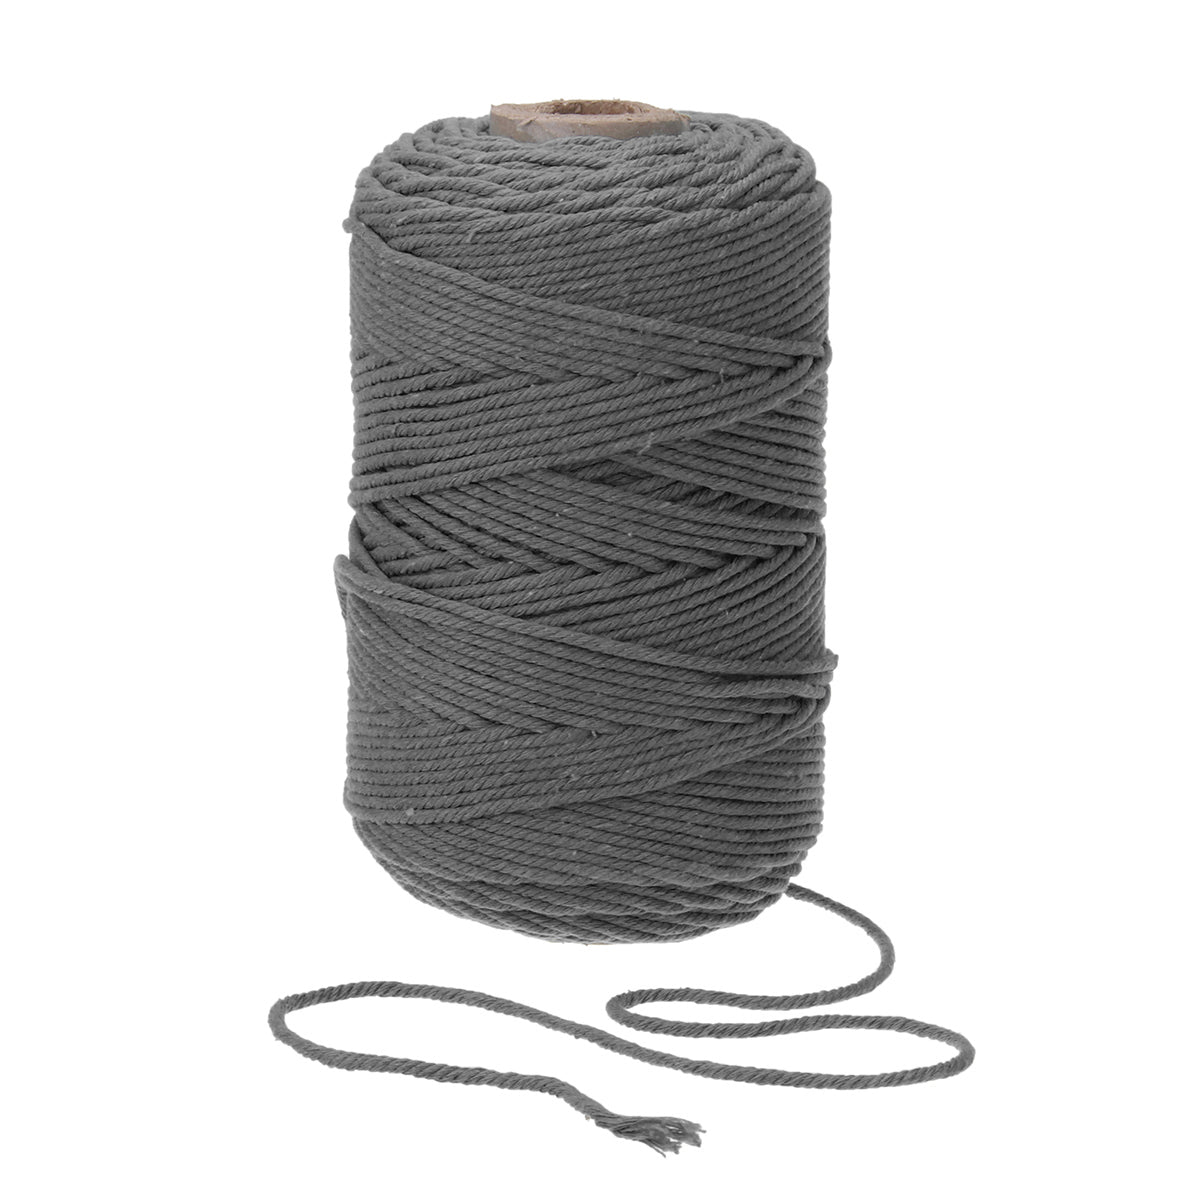 200M 3mm 100% Natural Cotton Twisted Cord Crafts DIY Macrame String Decorations 